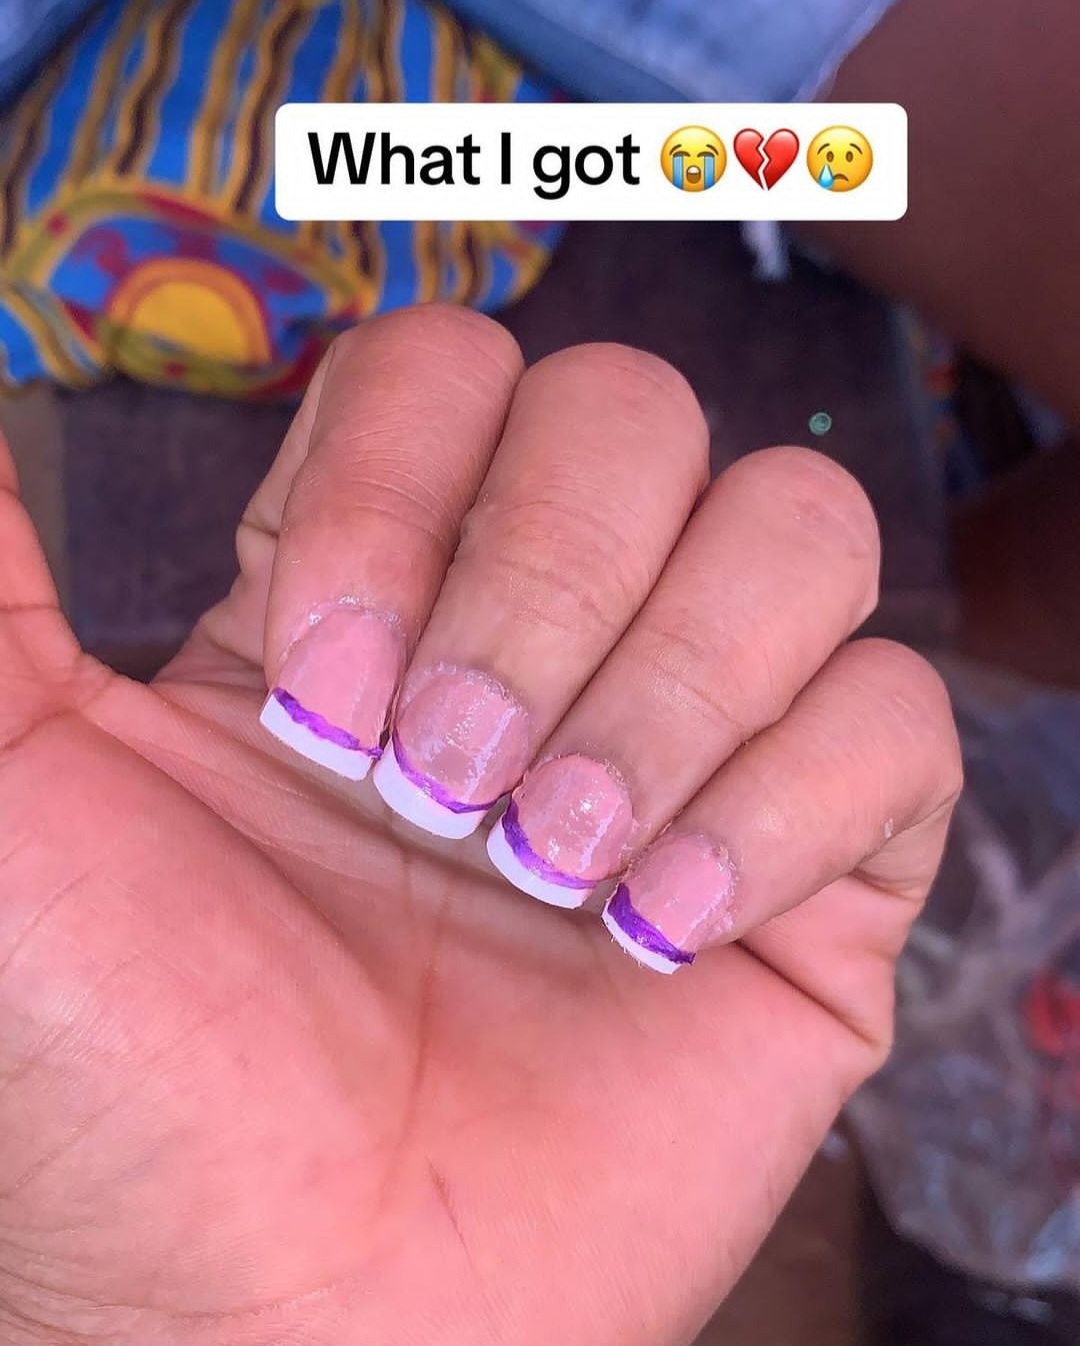 Woman shows nails she asked for and what her nail technician did for her